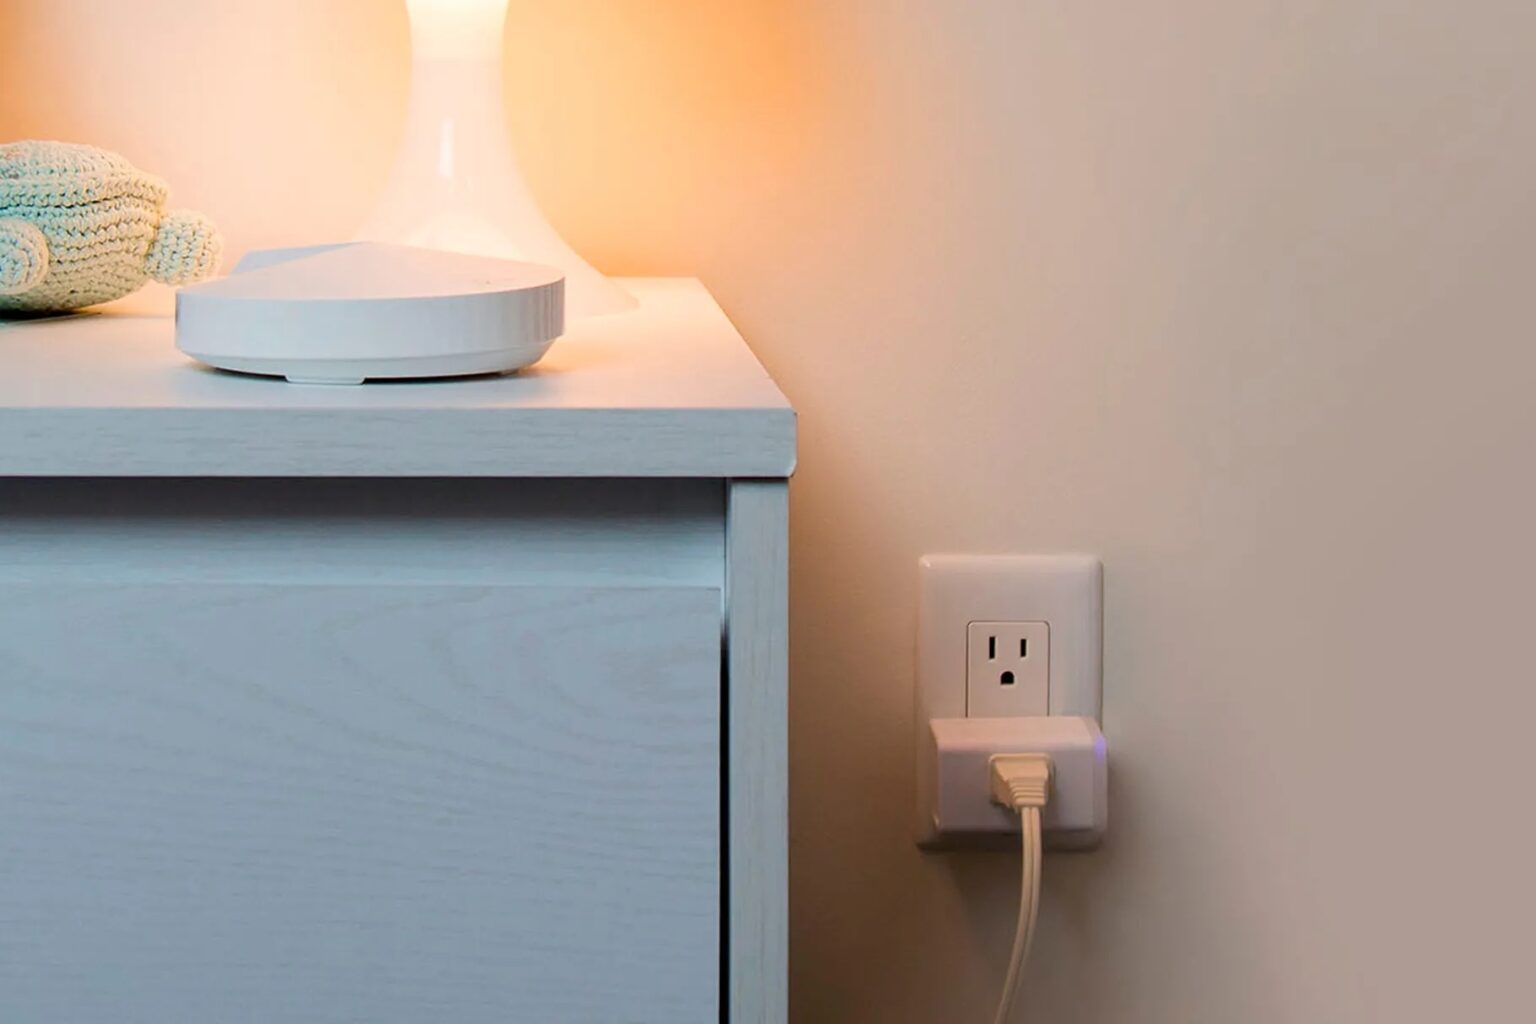 A four-pack for $50 is a good deal for something that won't block other outlets, works with HomeKit and monitors energy.